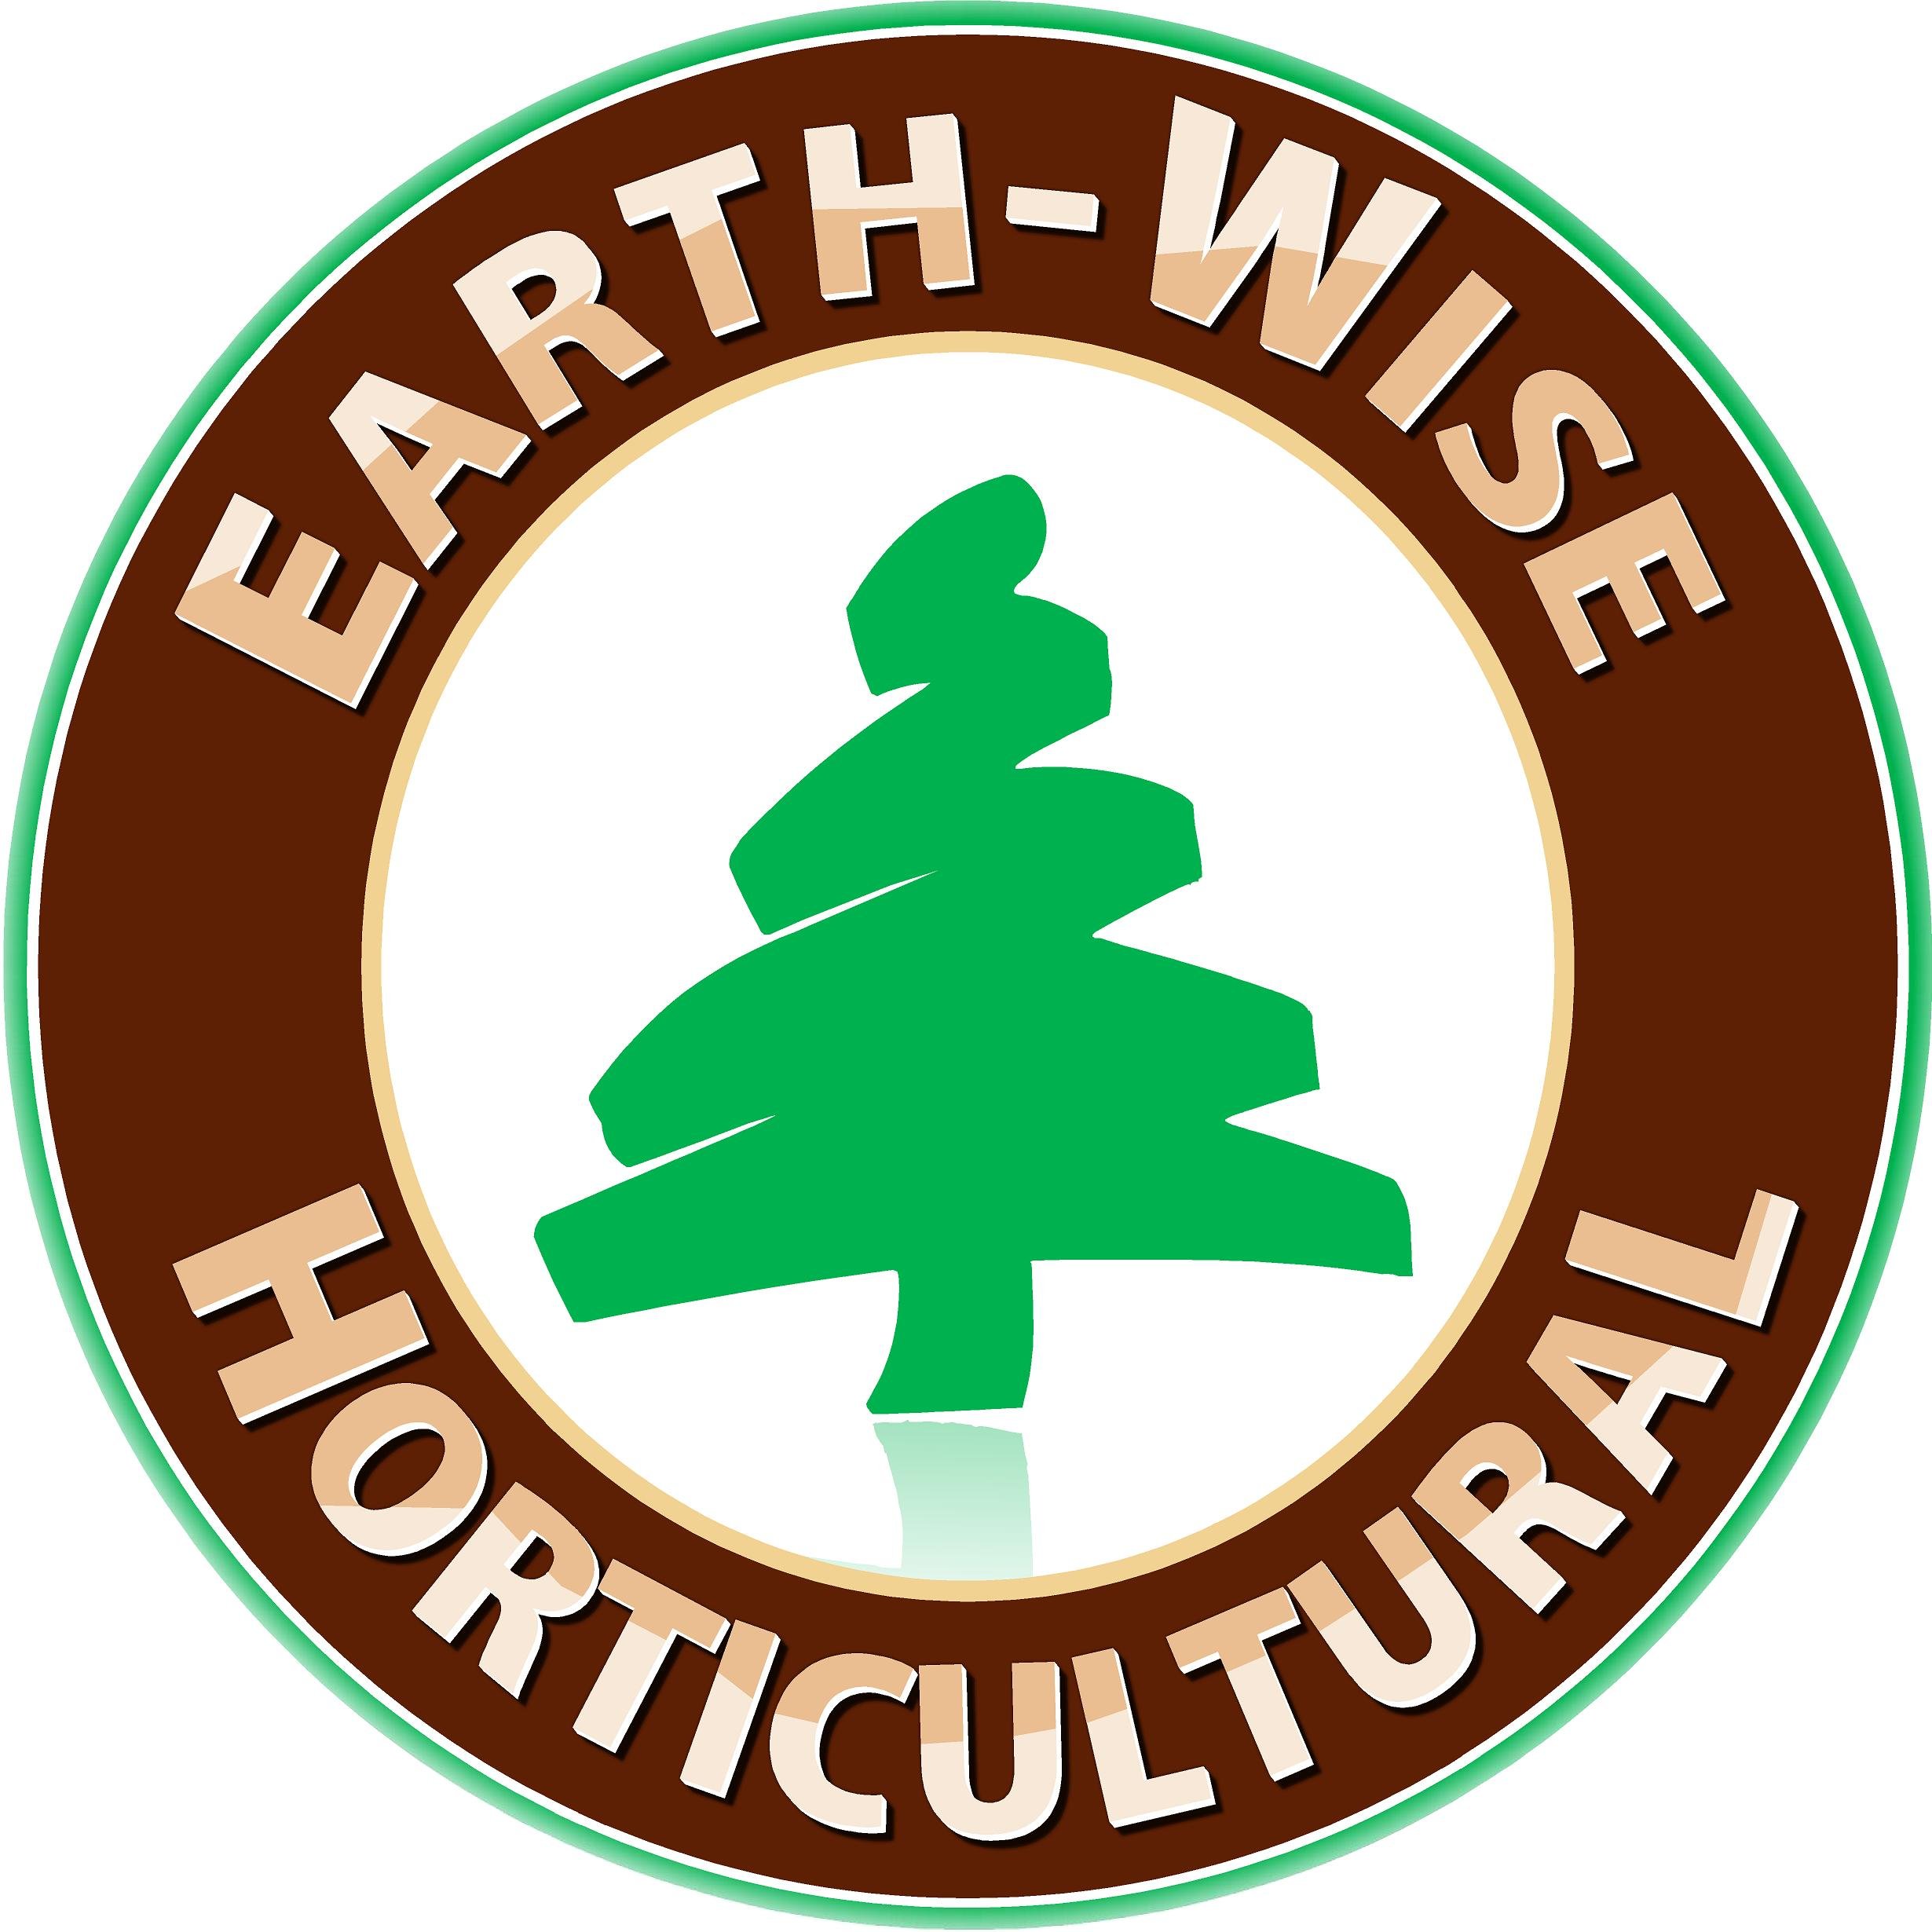 Earth-Wise Horticultural $500 copy.jpeg